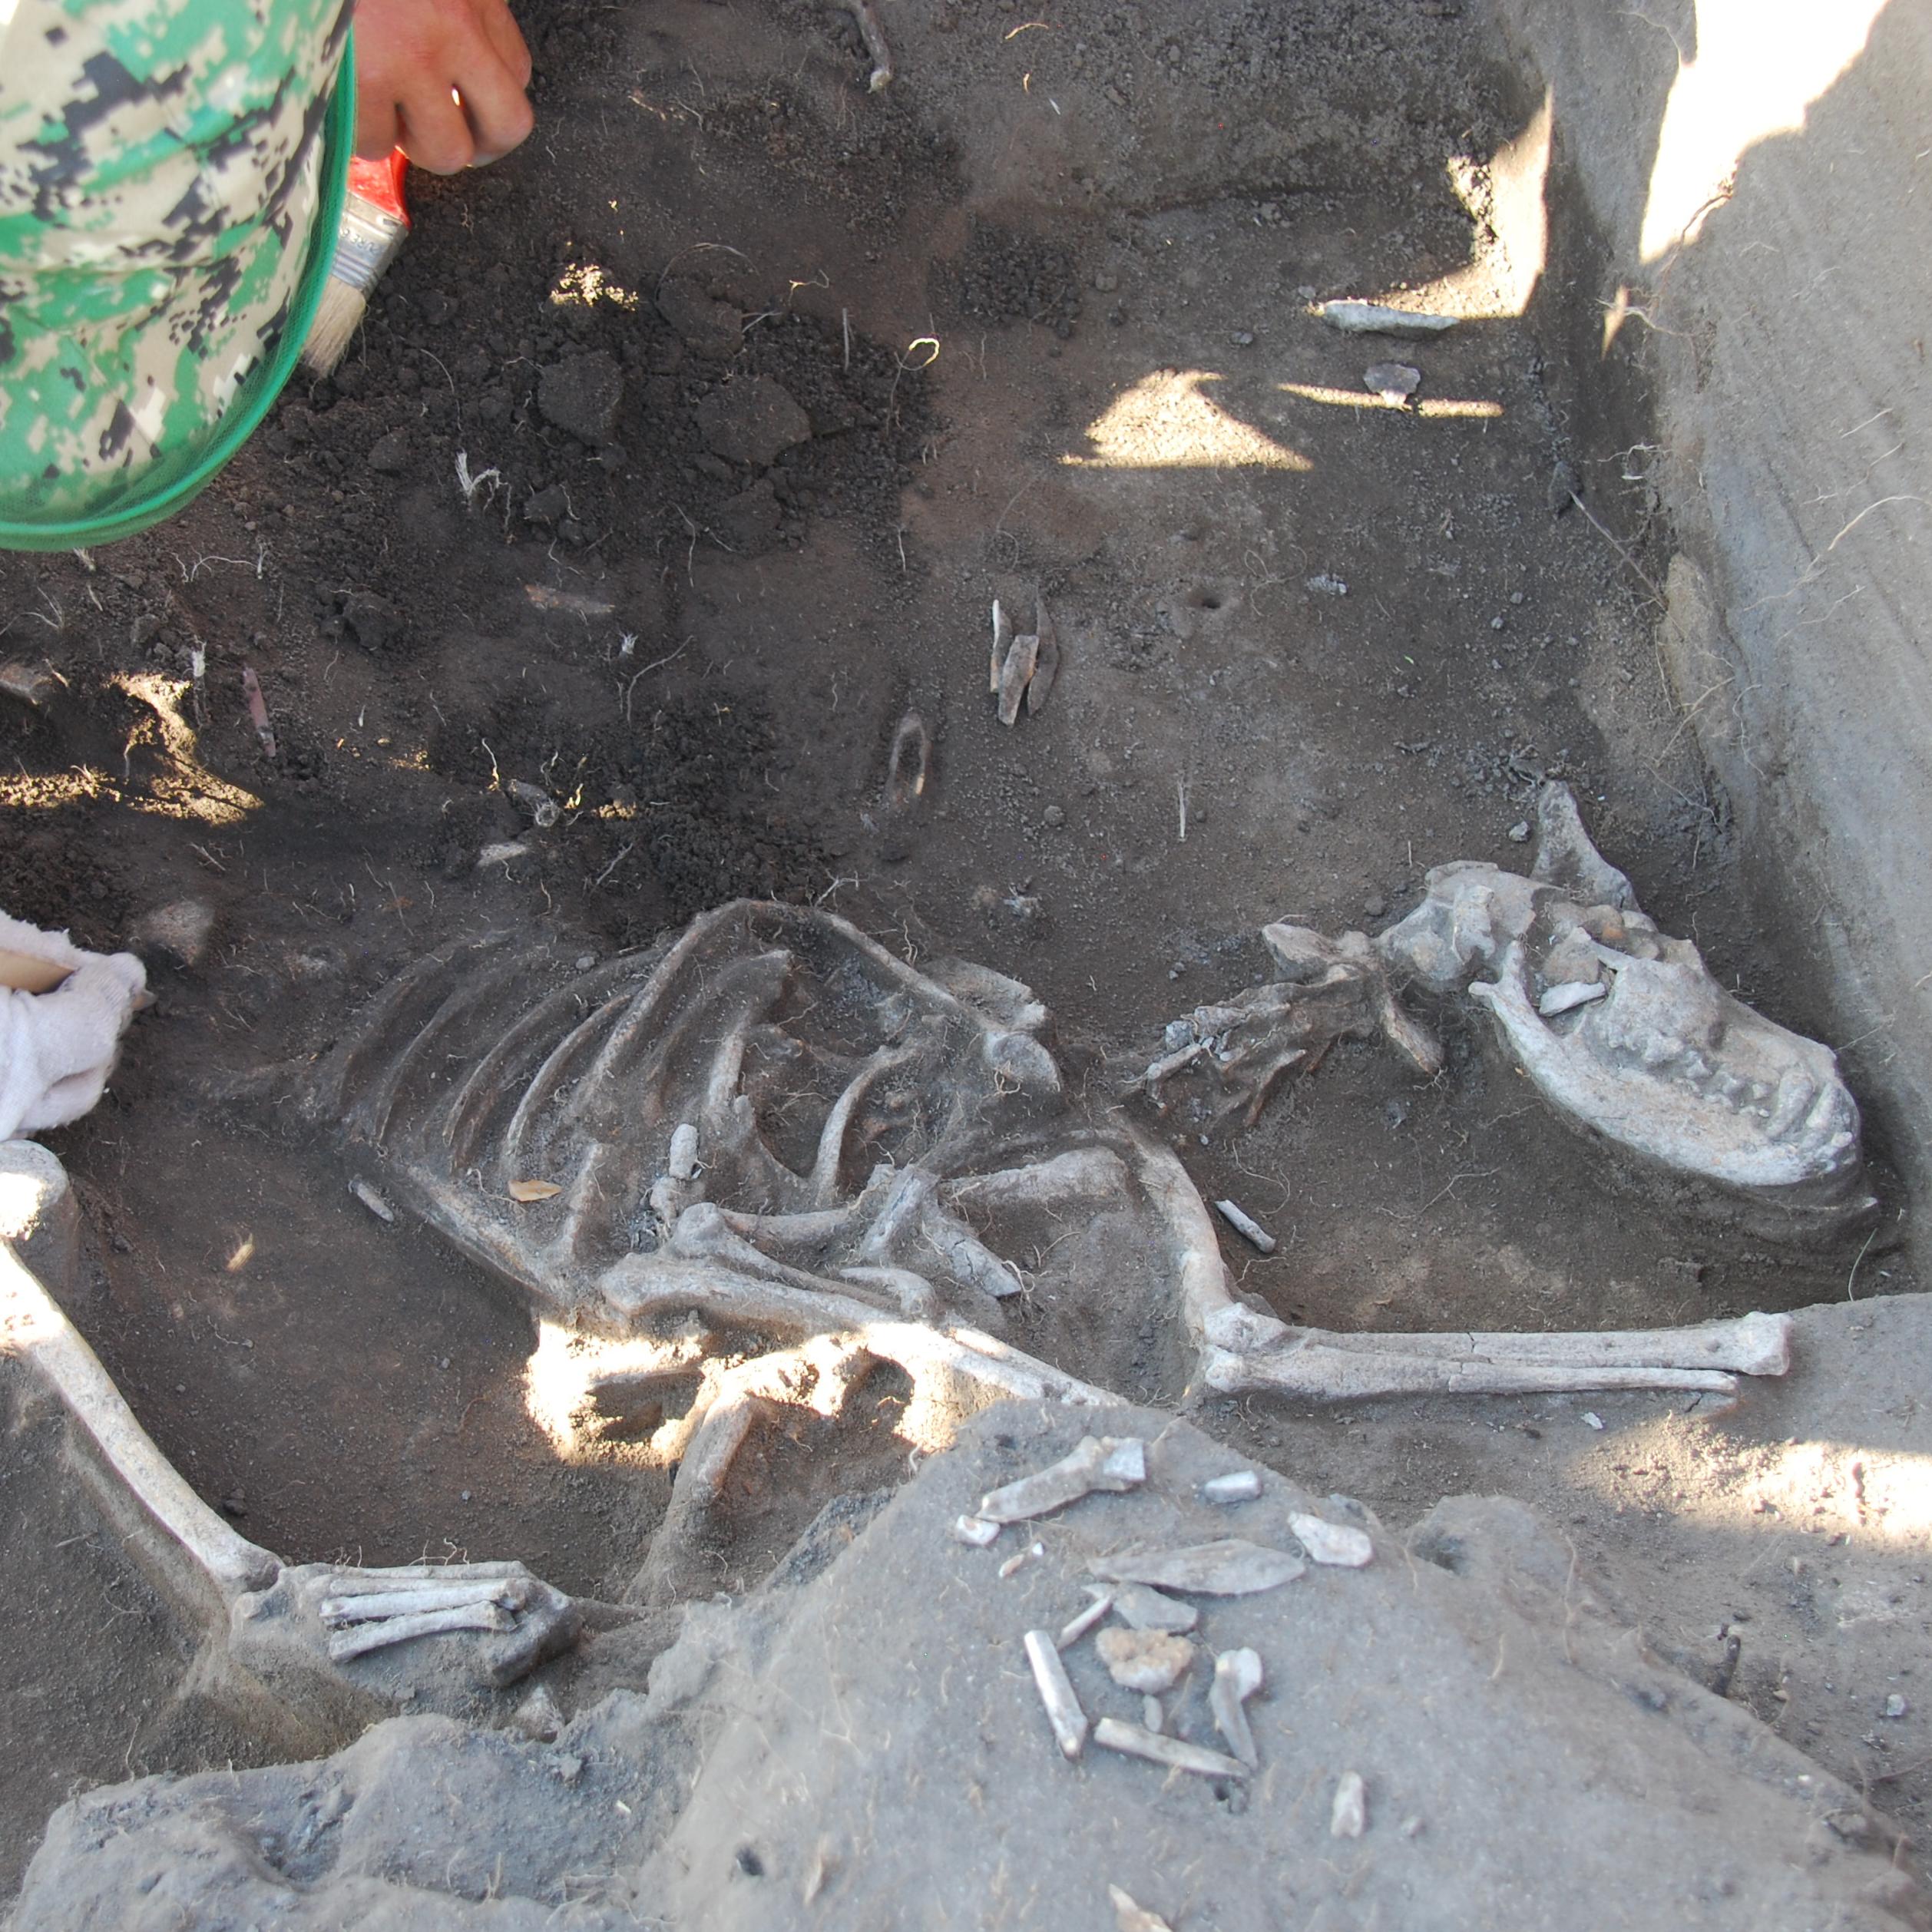 The skeleton of a dog being excavated in the Gobi Steppe, Mongolia